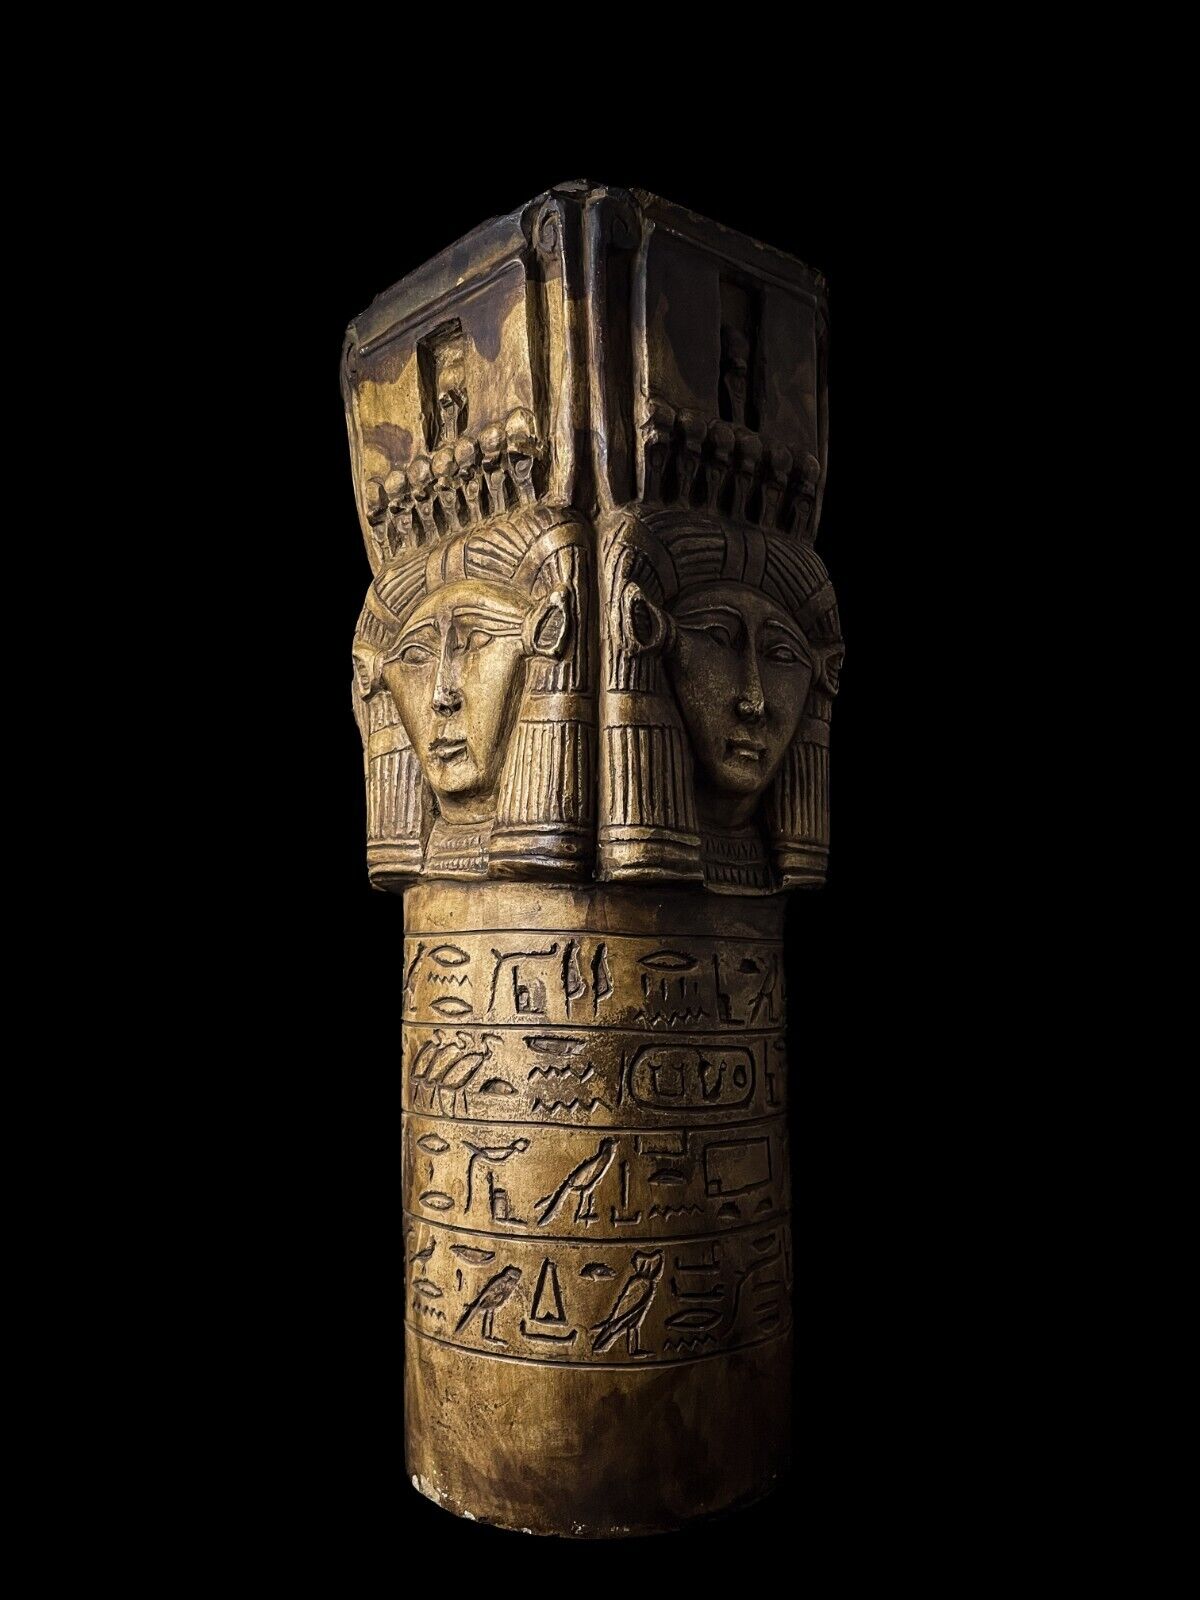 One of a Kind Replica Artifact for Hathor Column Like the one in Dendera temple